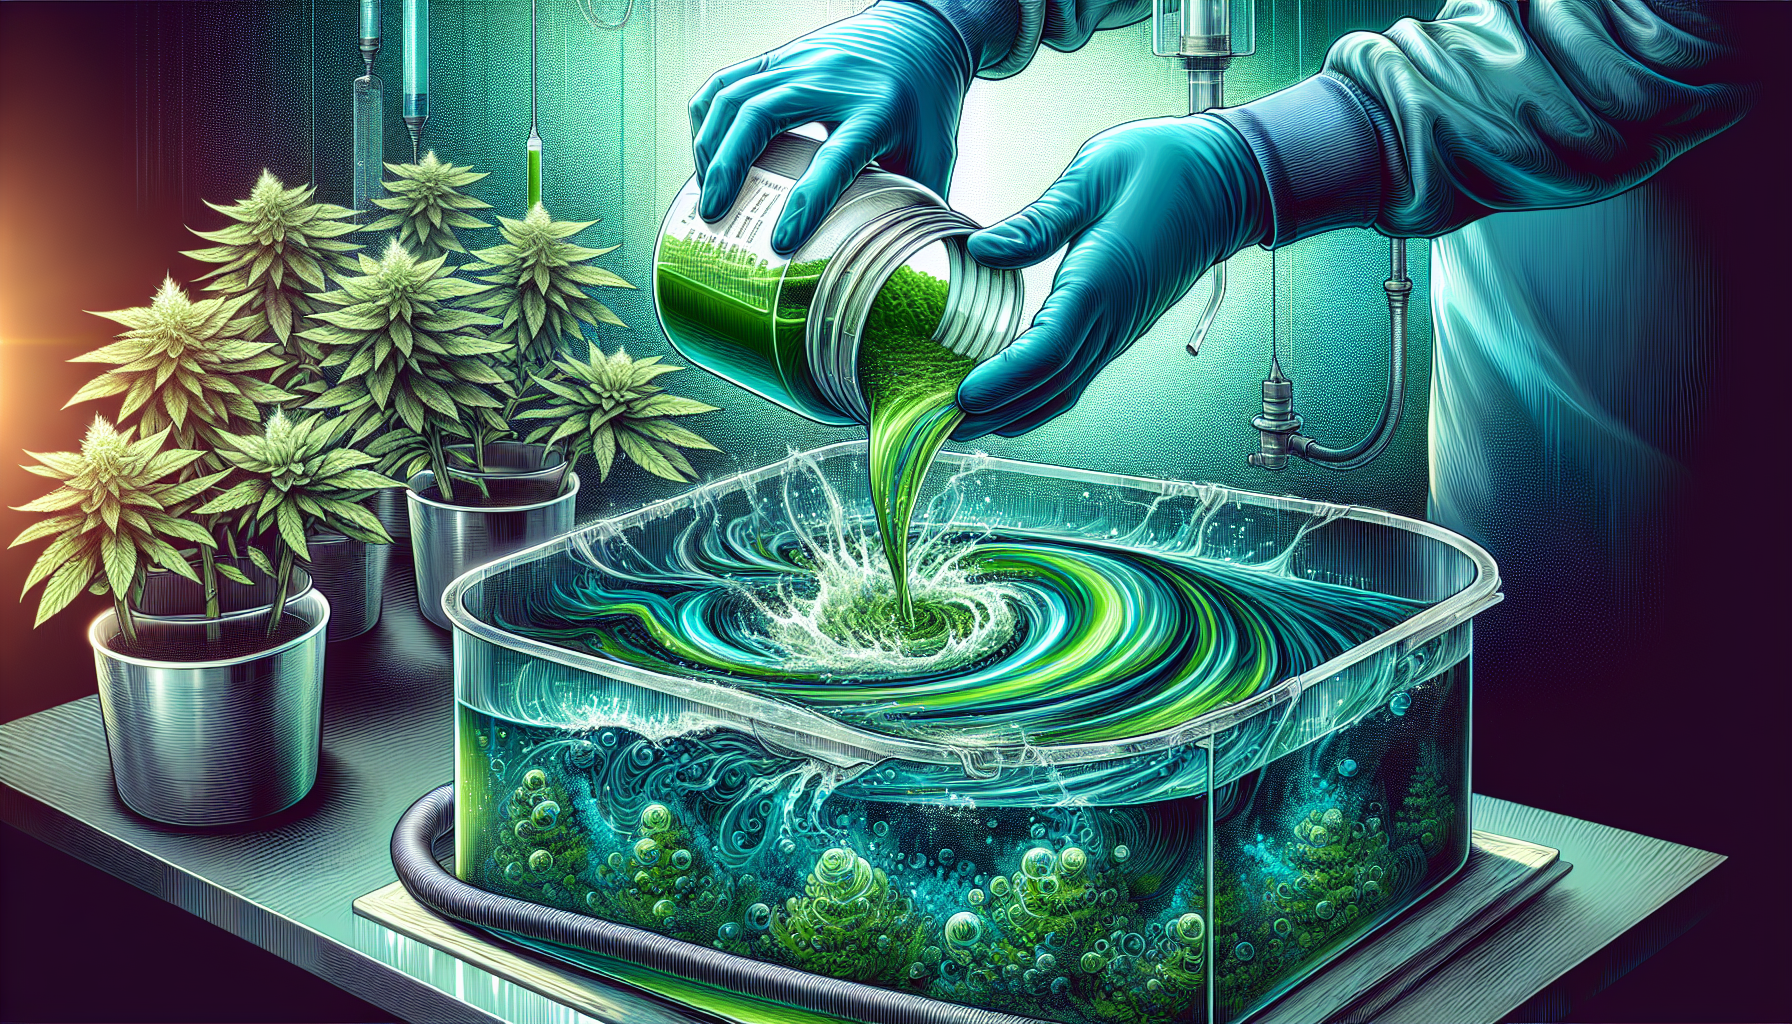 Illustration of hydroponic nutrient solution being prepared